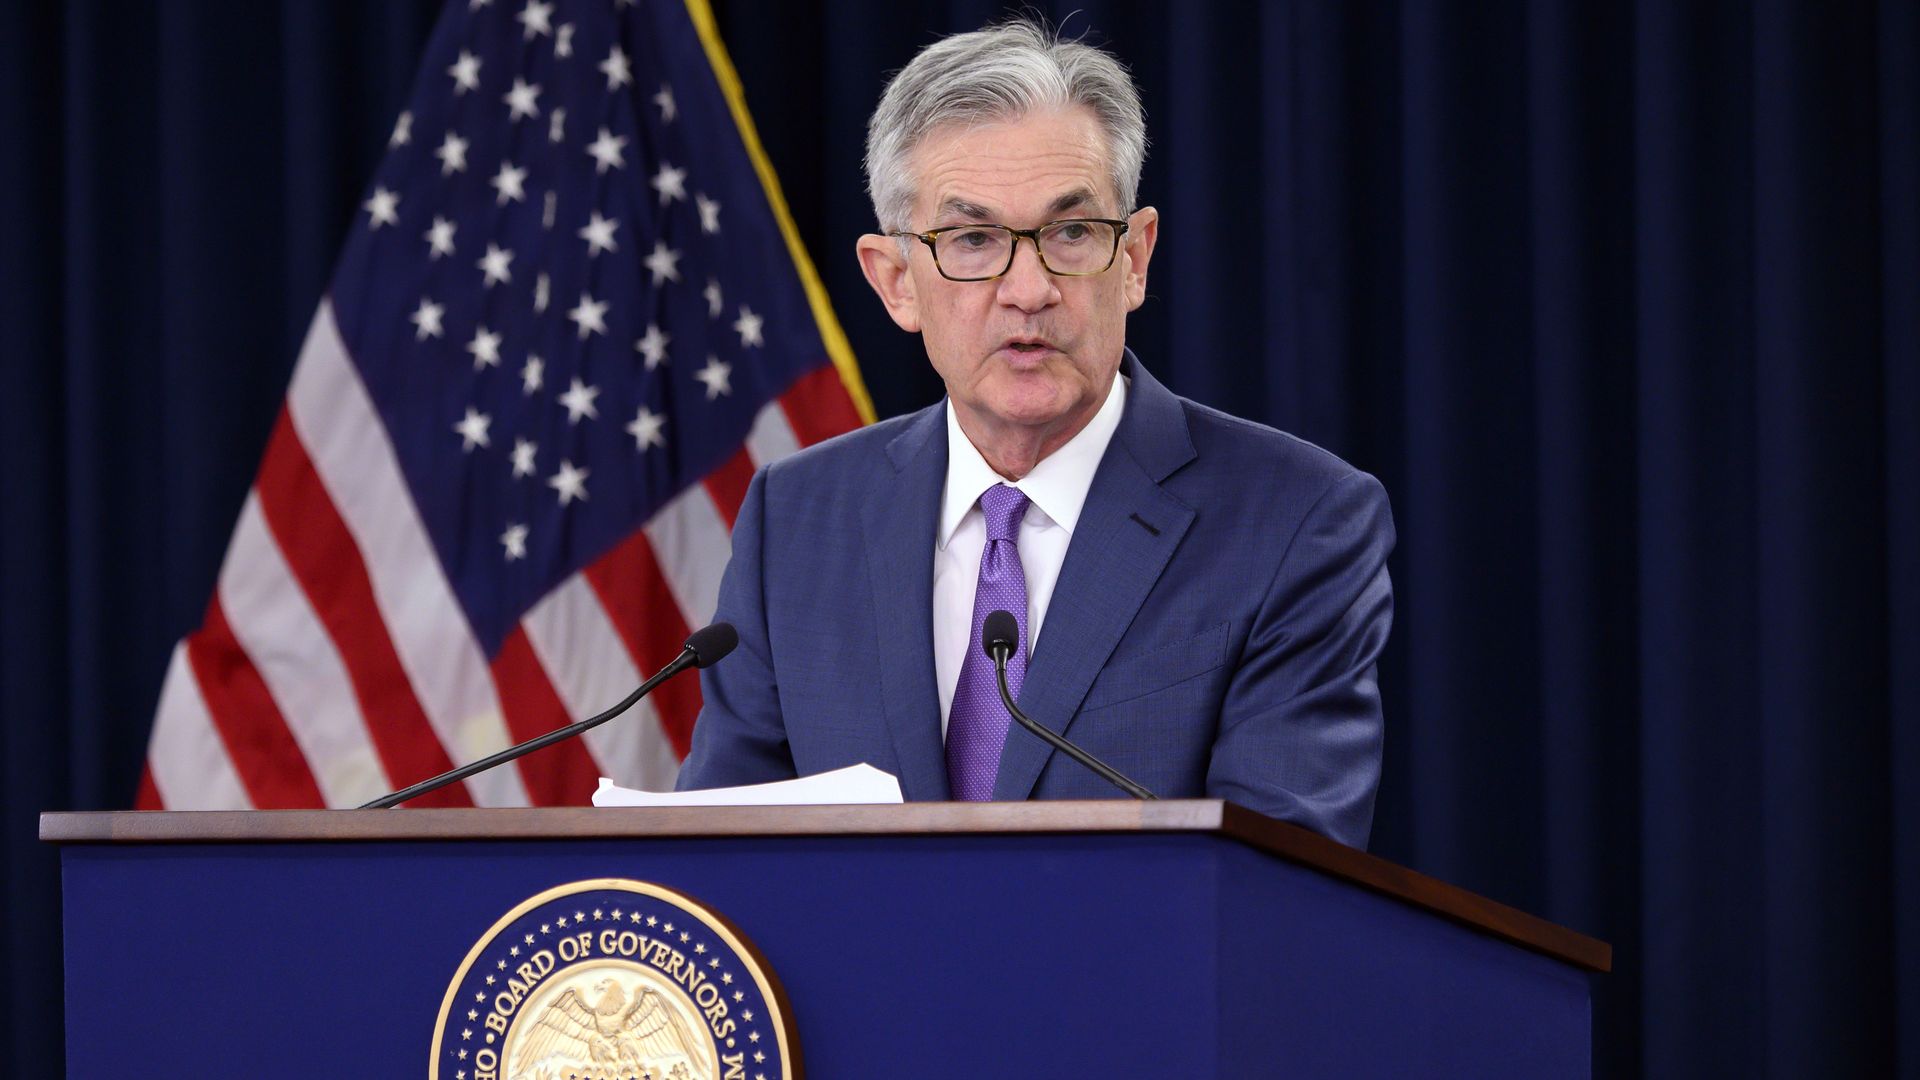 US Federal Reserve Chairman Jerome Powell speaks during a press conference after a Federal Open Market Committee meeting in Washington, DC on July 31, 2019